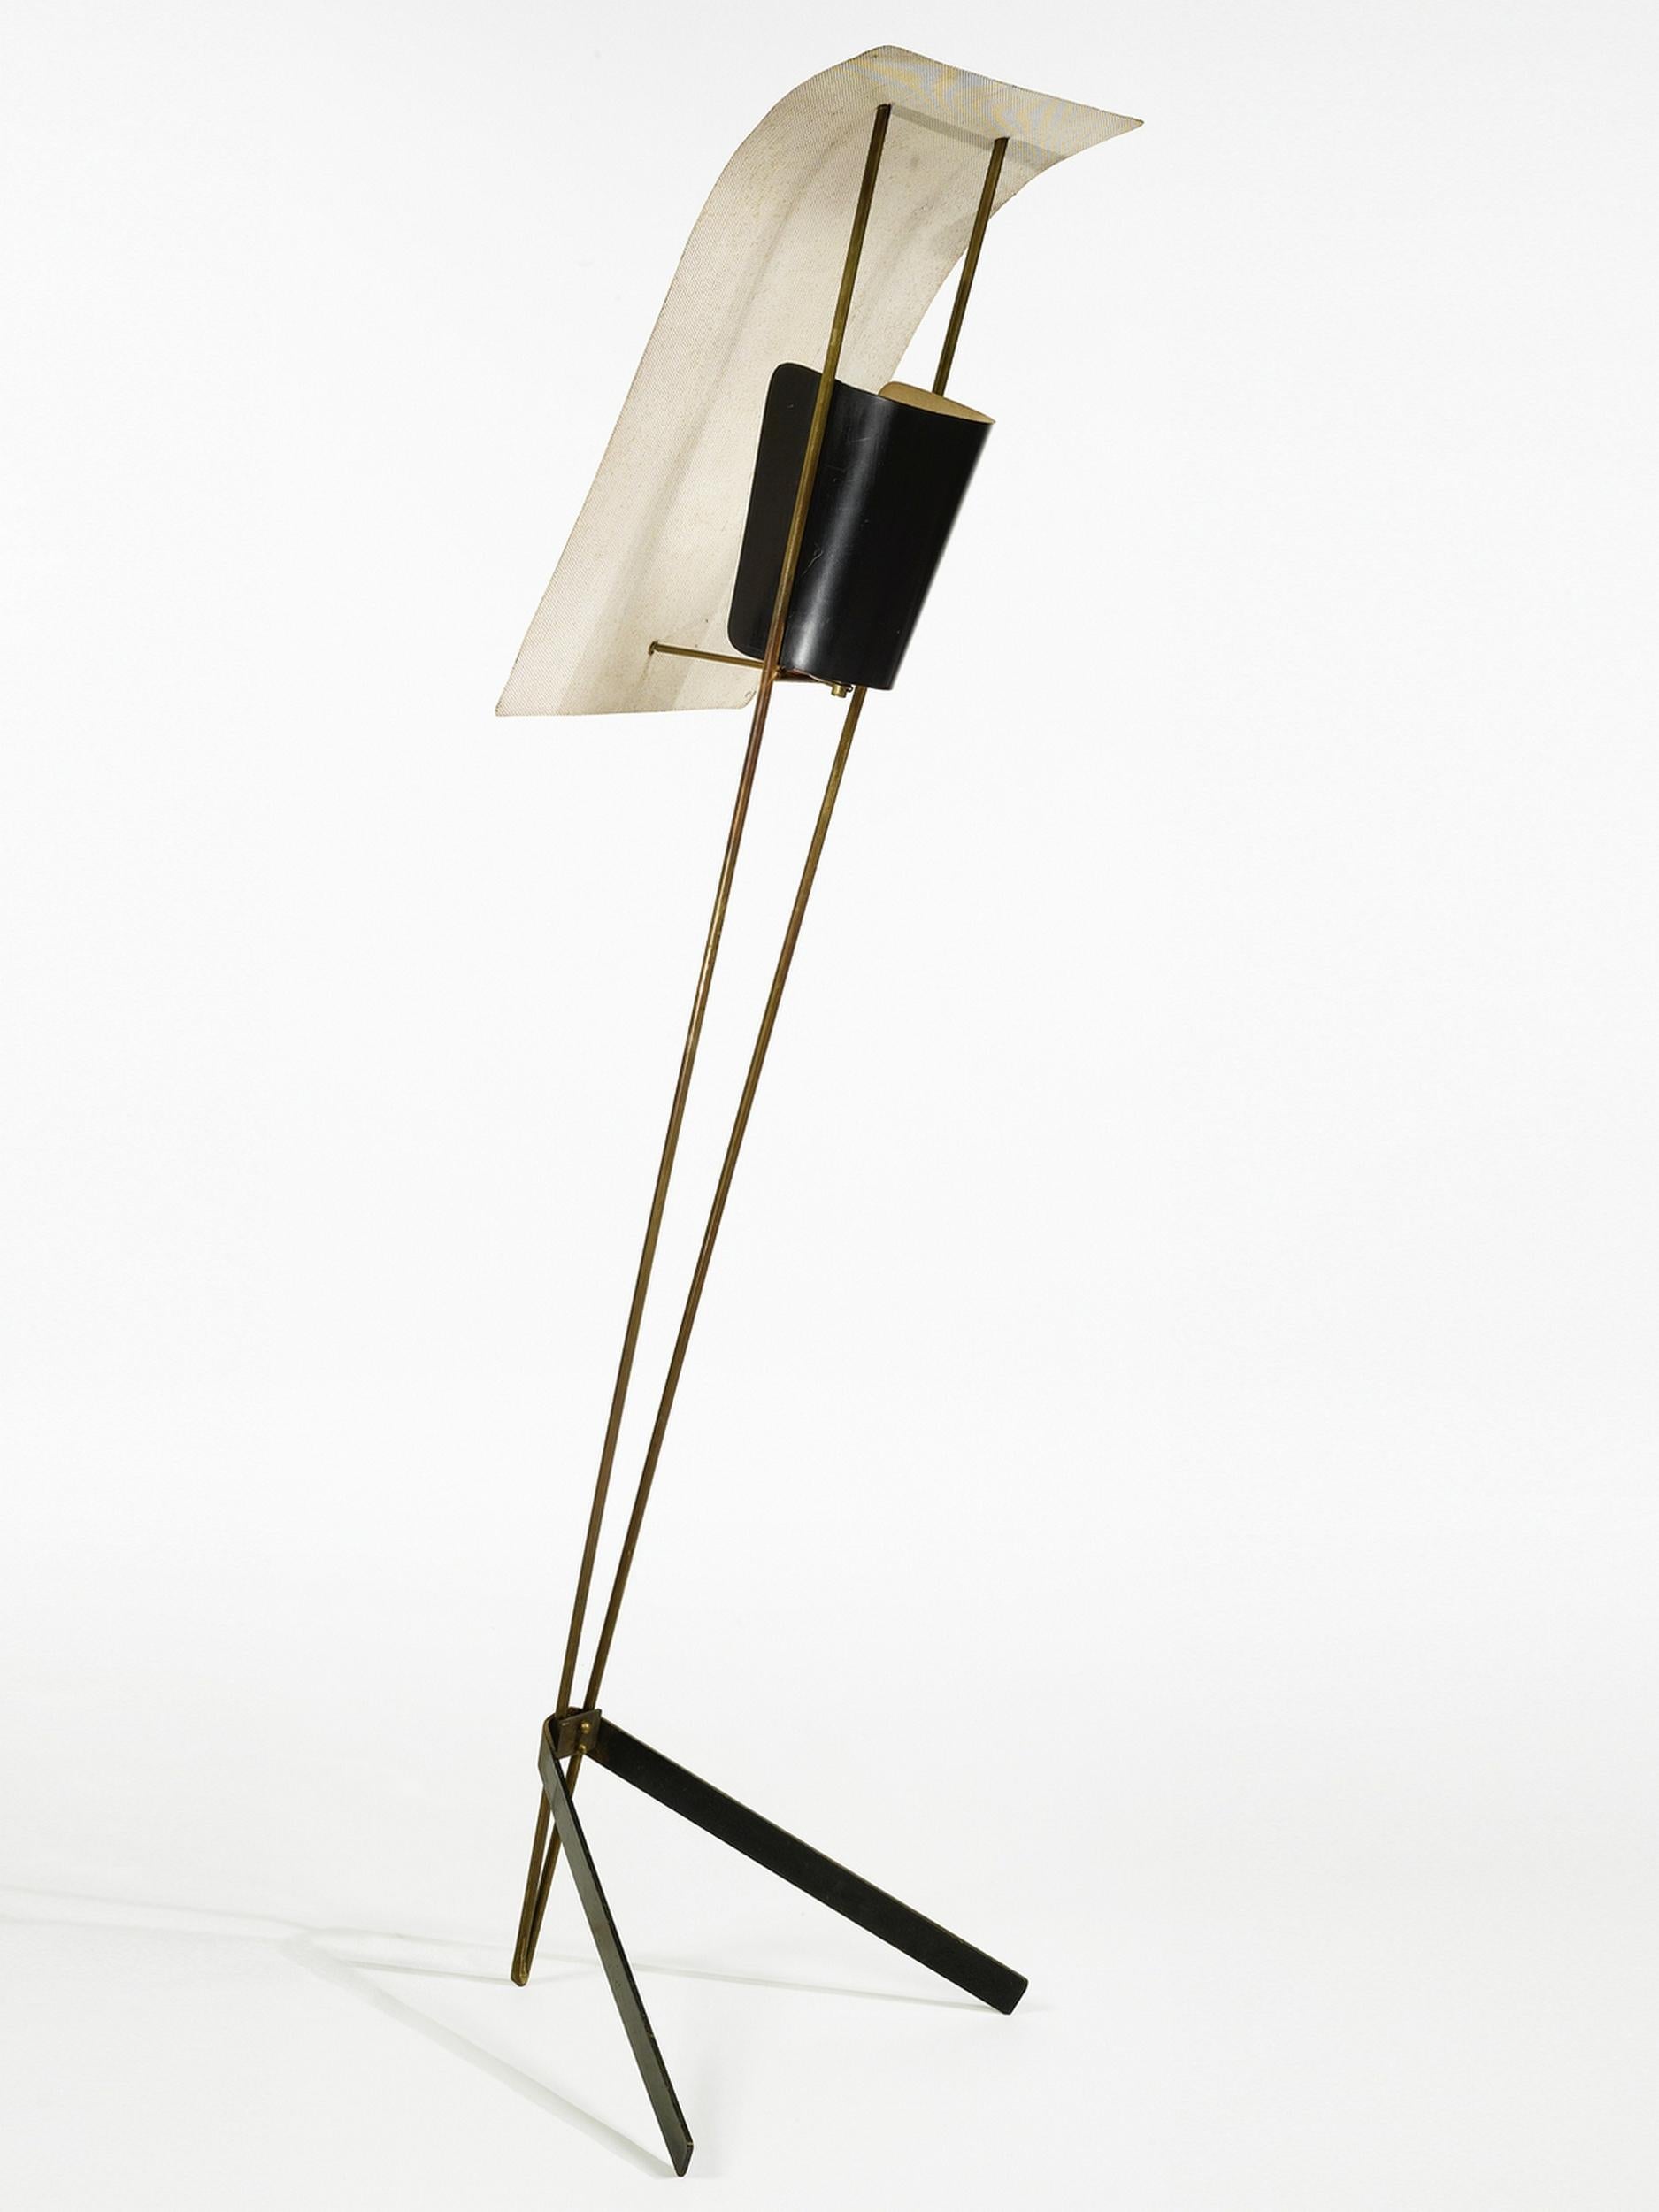 « Cerf-volant » model floor lamp by Pierre Guariche, Editions Atelier Pierre Disderot, Paris, France, circa 1952, with a shaft composed of two gilded brass tubes forming a « V », enclosing a curved, black-lacquered metal bulb cover, topped by a